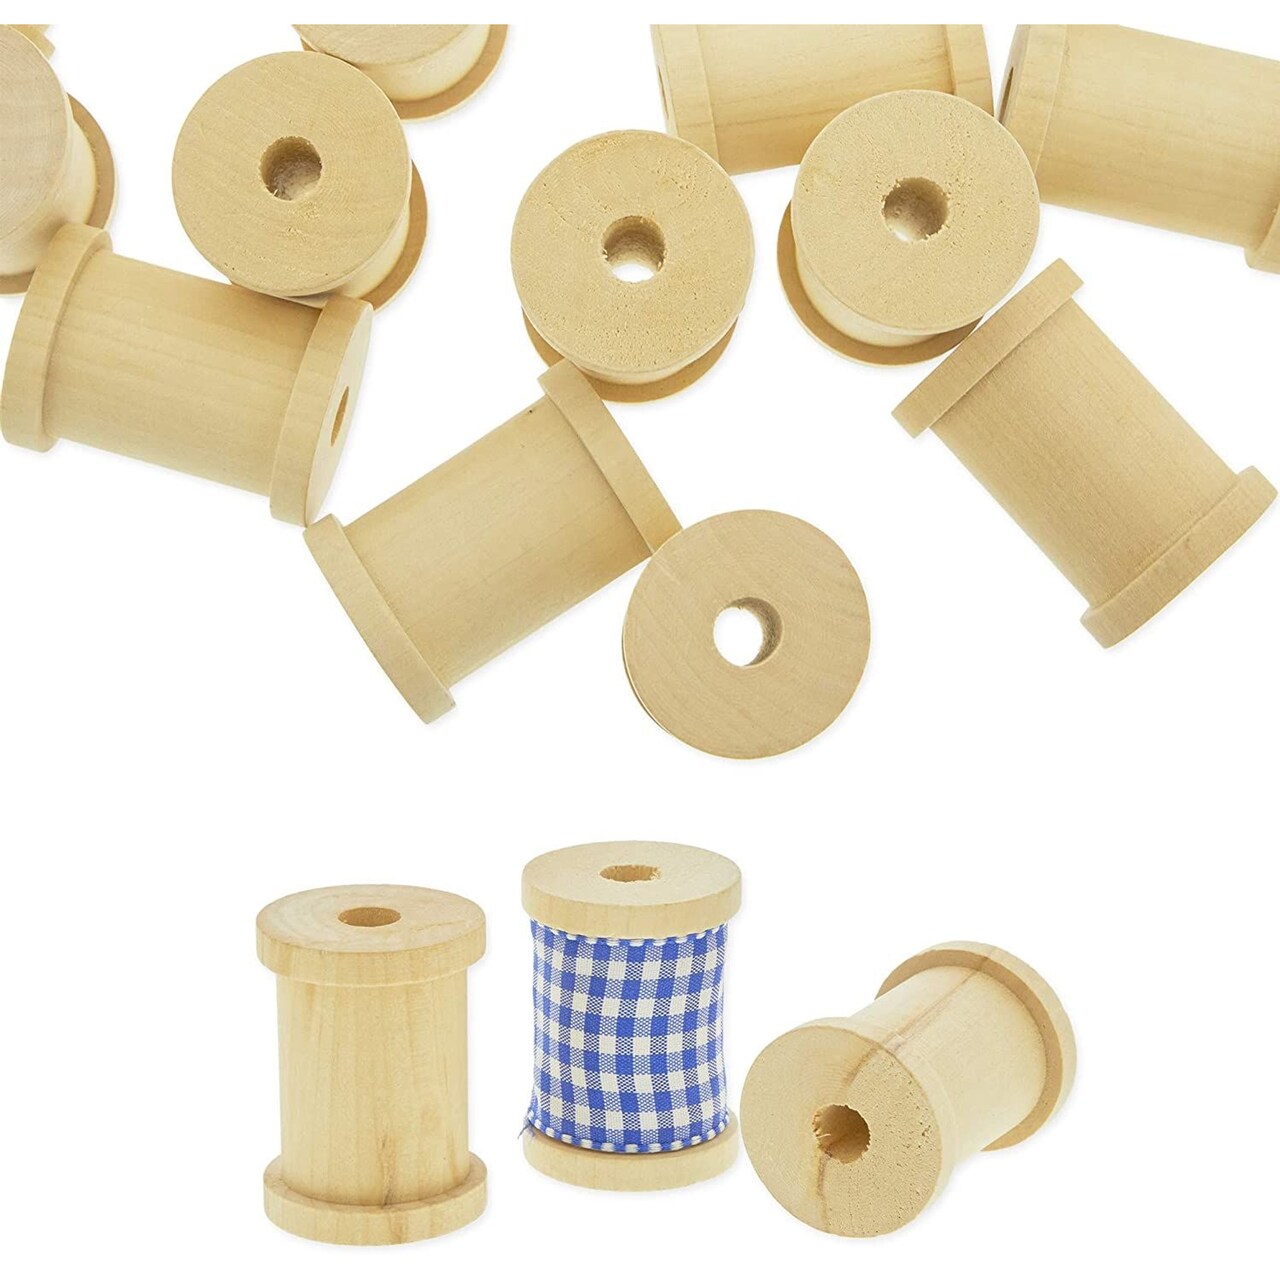 24 Pack Unfinished Wooden Spools for Crafts, Sewing, Thread, Twine, Ribbon,  2 x 1.5 in